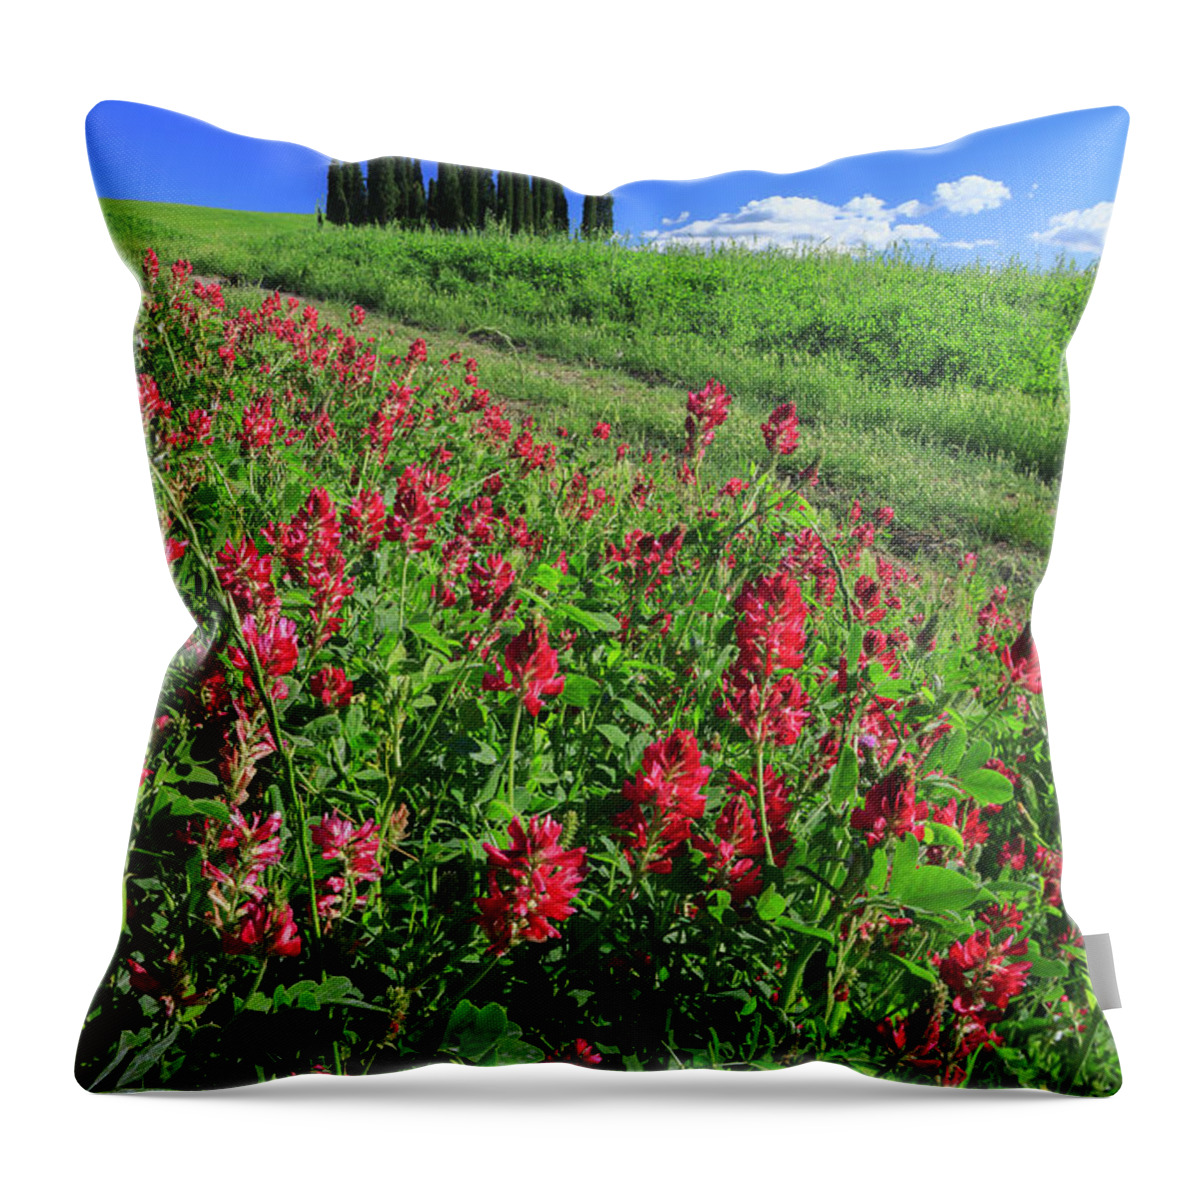 Estock Throw Pillow featuring the digital art Italy, Tuscany, Flowers In Bloom by Maurizio Rellini